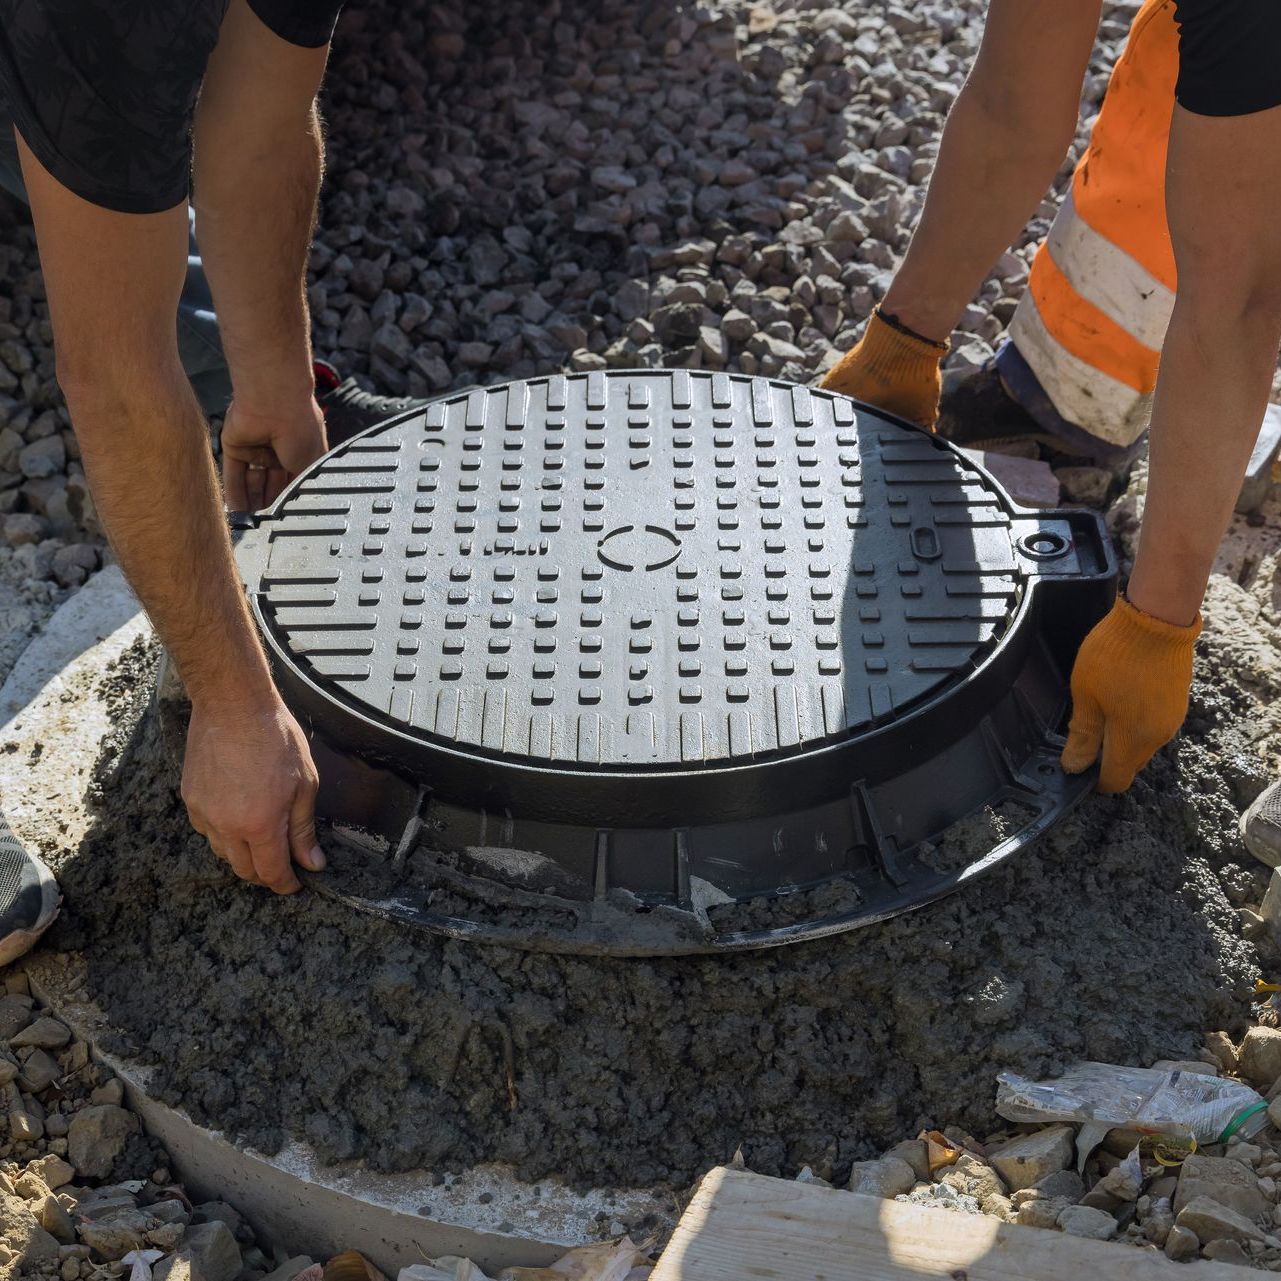 Putting an iron lid on the sewer